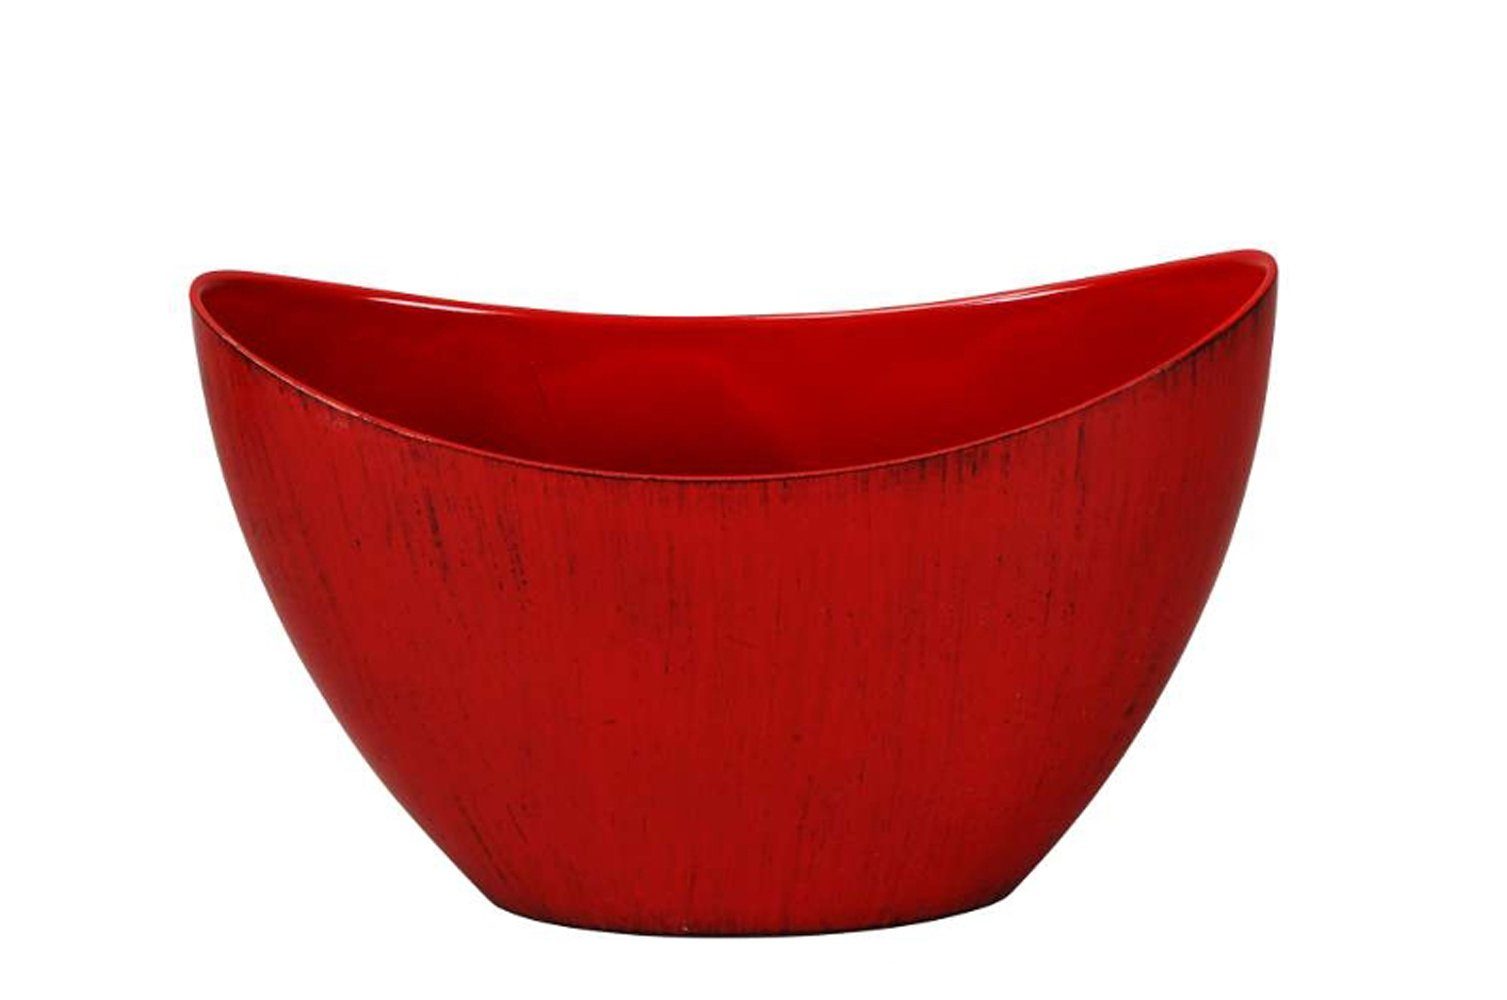 Posiwio Dekoschale Posiwio Dekoschale Schale Jardiniere oval rot 24x10xH14,5cm Poly (1 St)